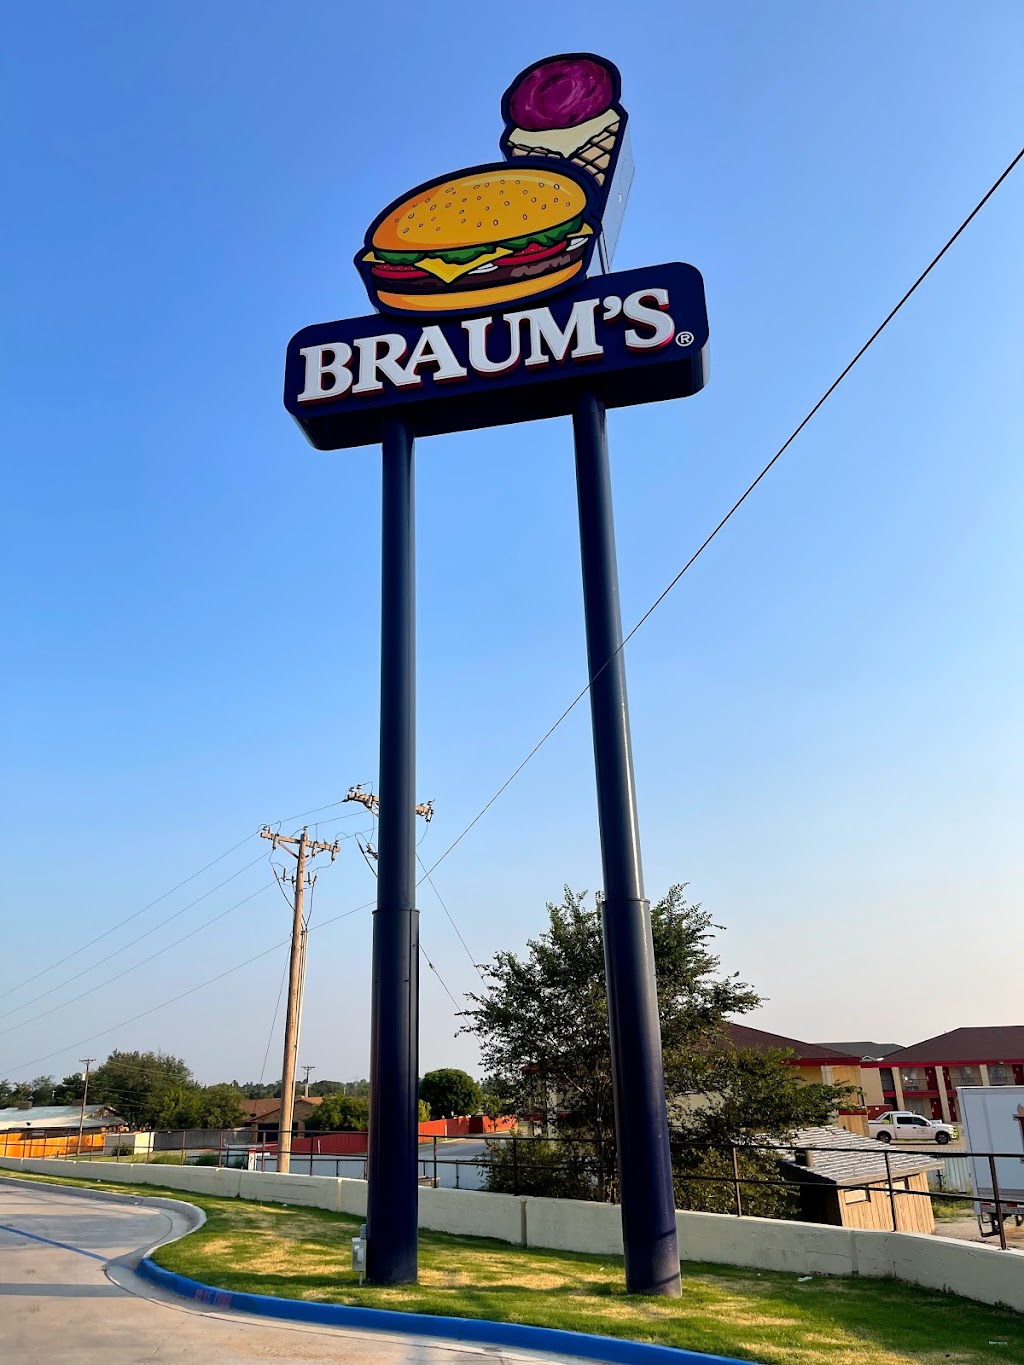 Braums Ice Cream & Dairy Store | restaurant | 3605 Olton Rd, Plainview, TX 79072, USA | 8062881000 OR +1 806-288-1000